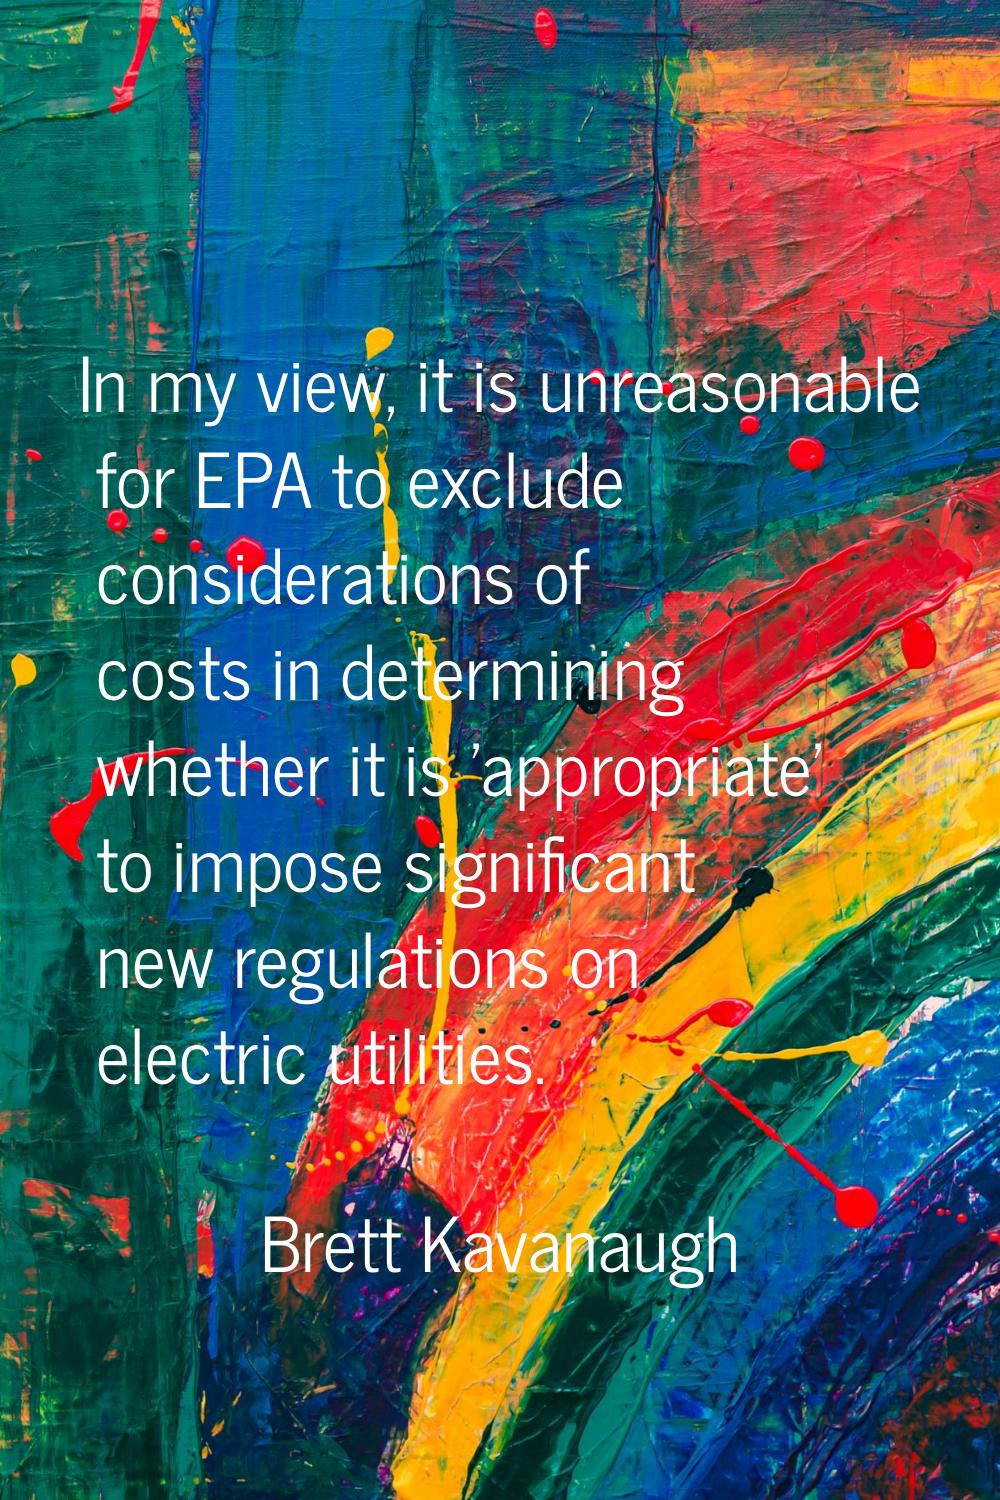 In my view, it is unreasonable for EPA to exclude considerations of costs in determining whether it